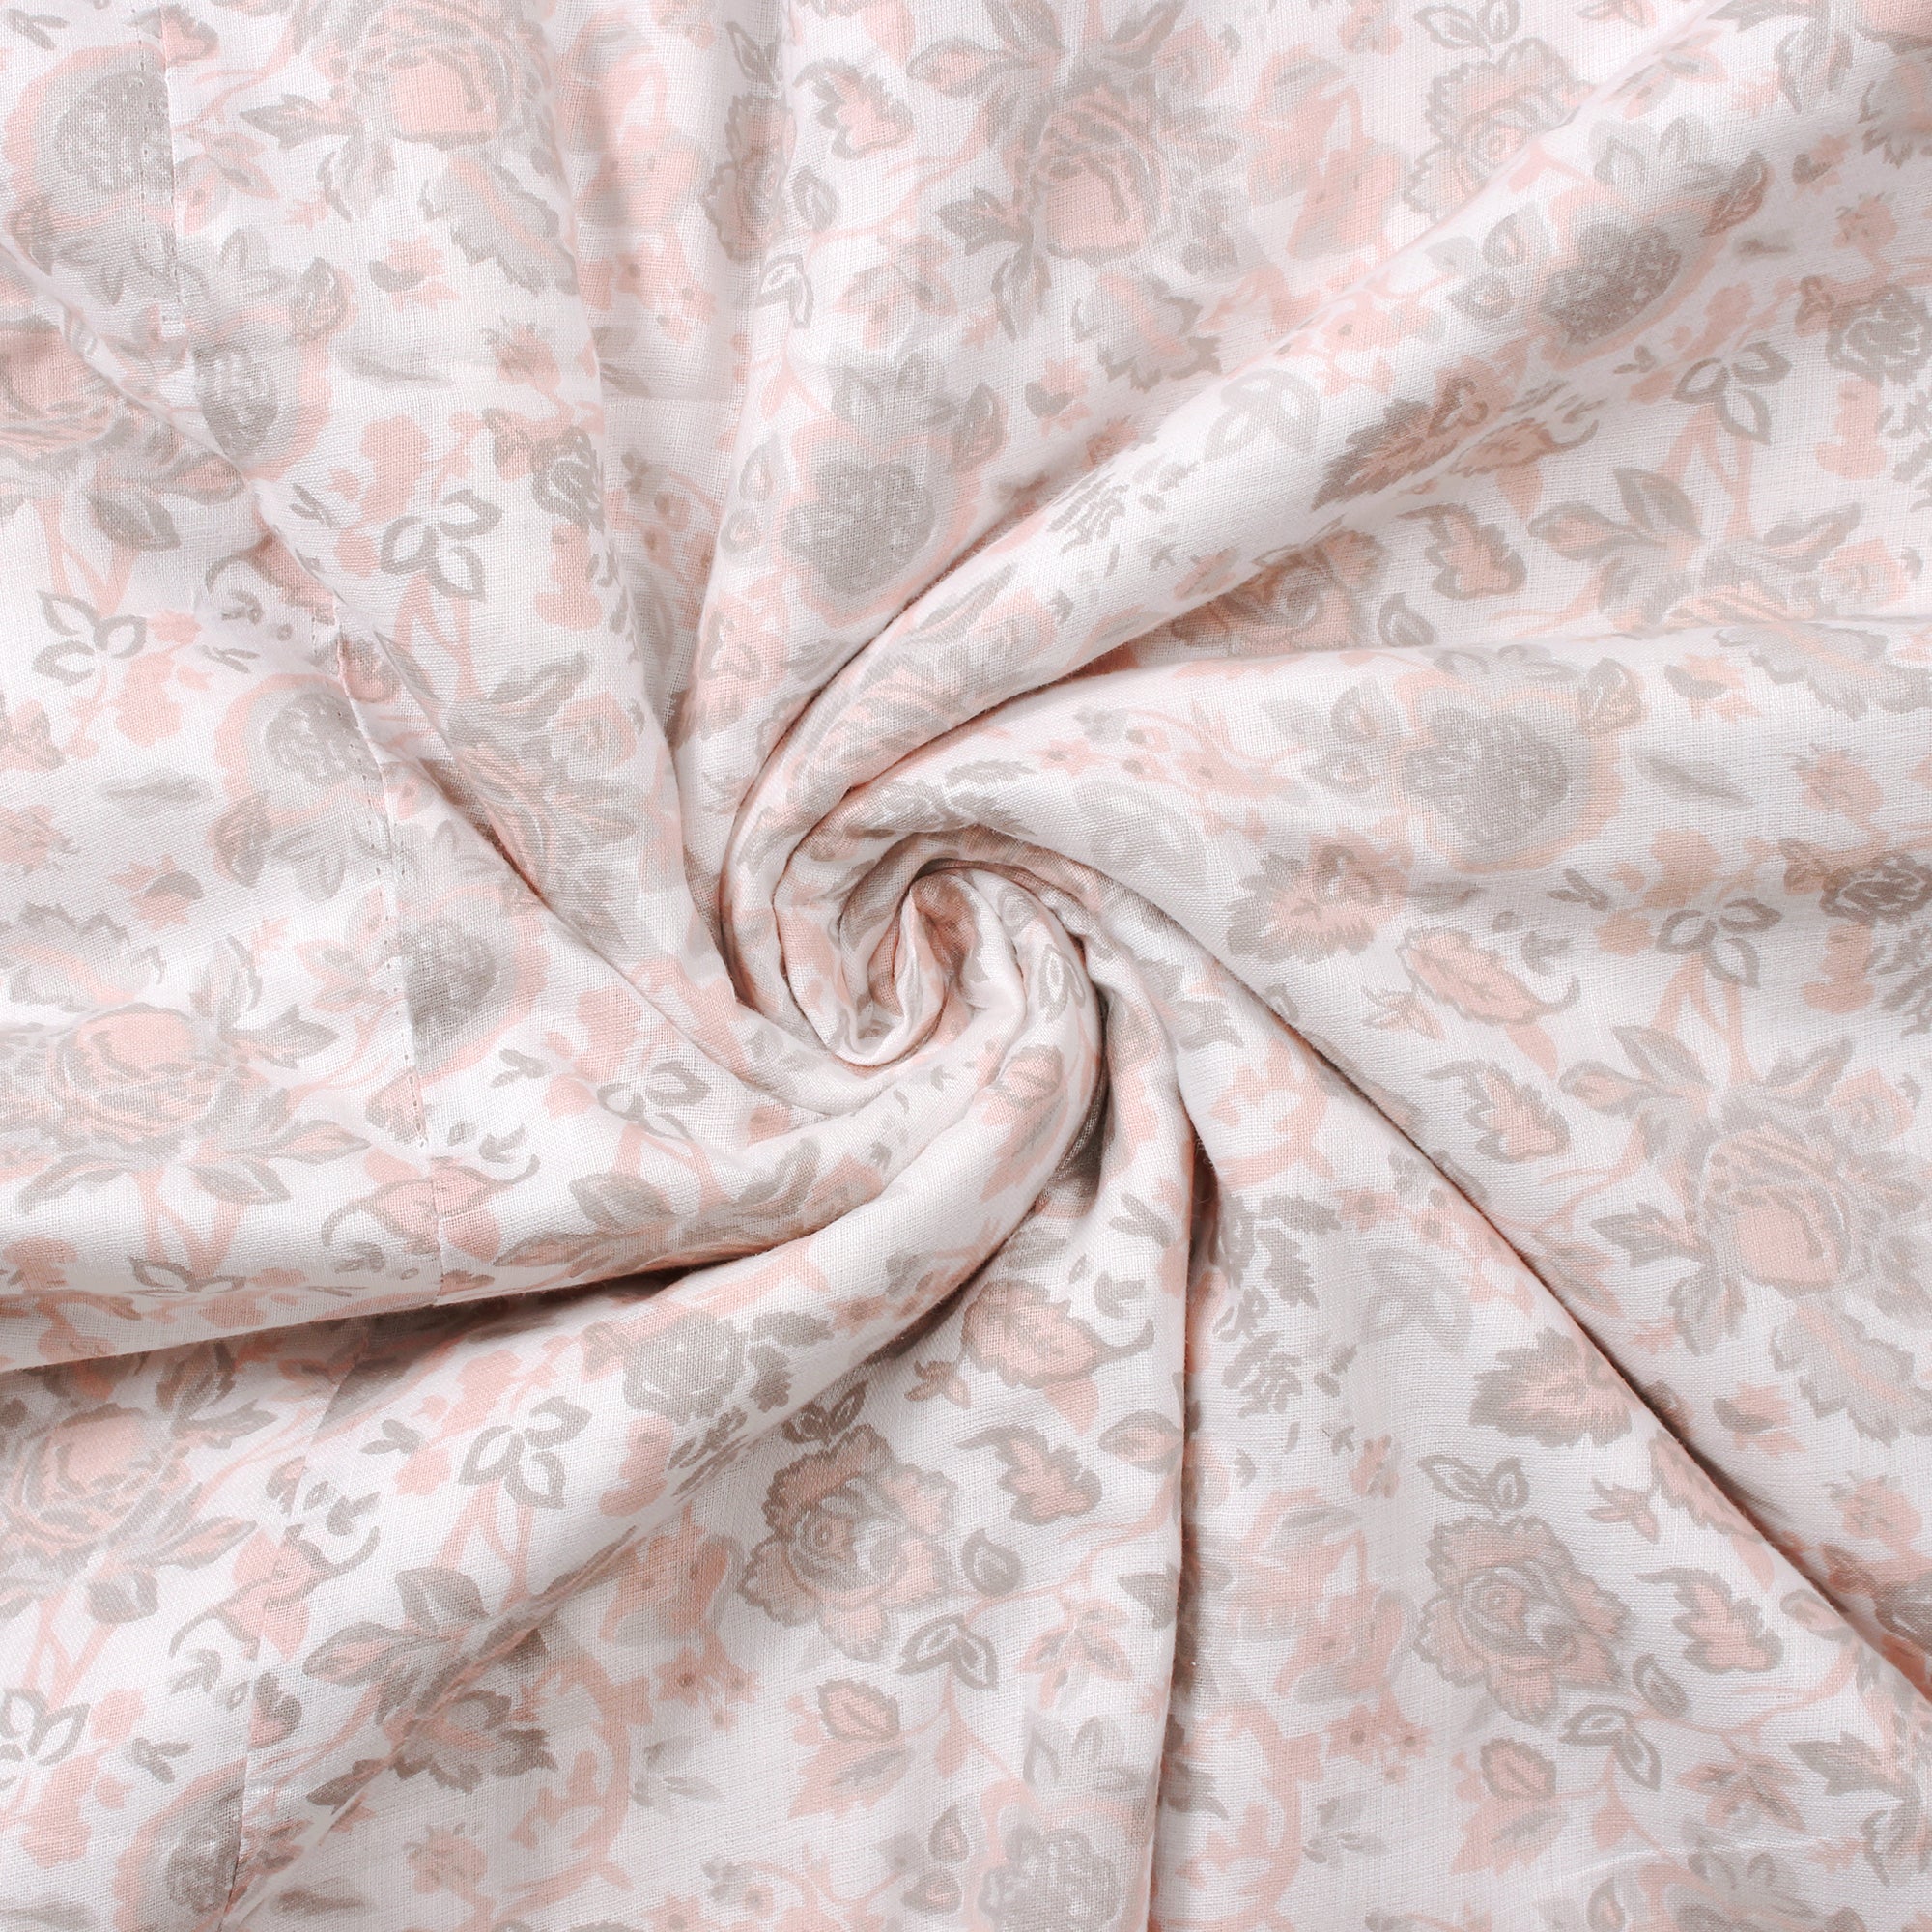 Super Soft Baby Pink & White Floral Reversible Single Size Dohar - Pack of 2